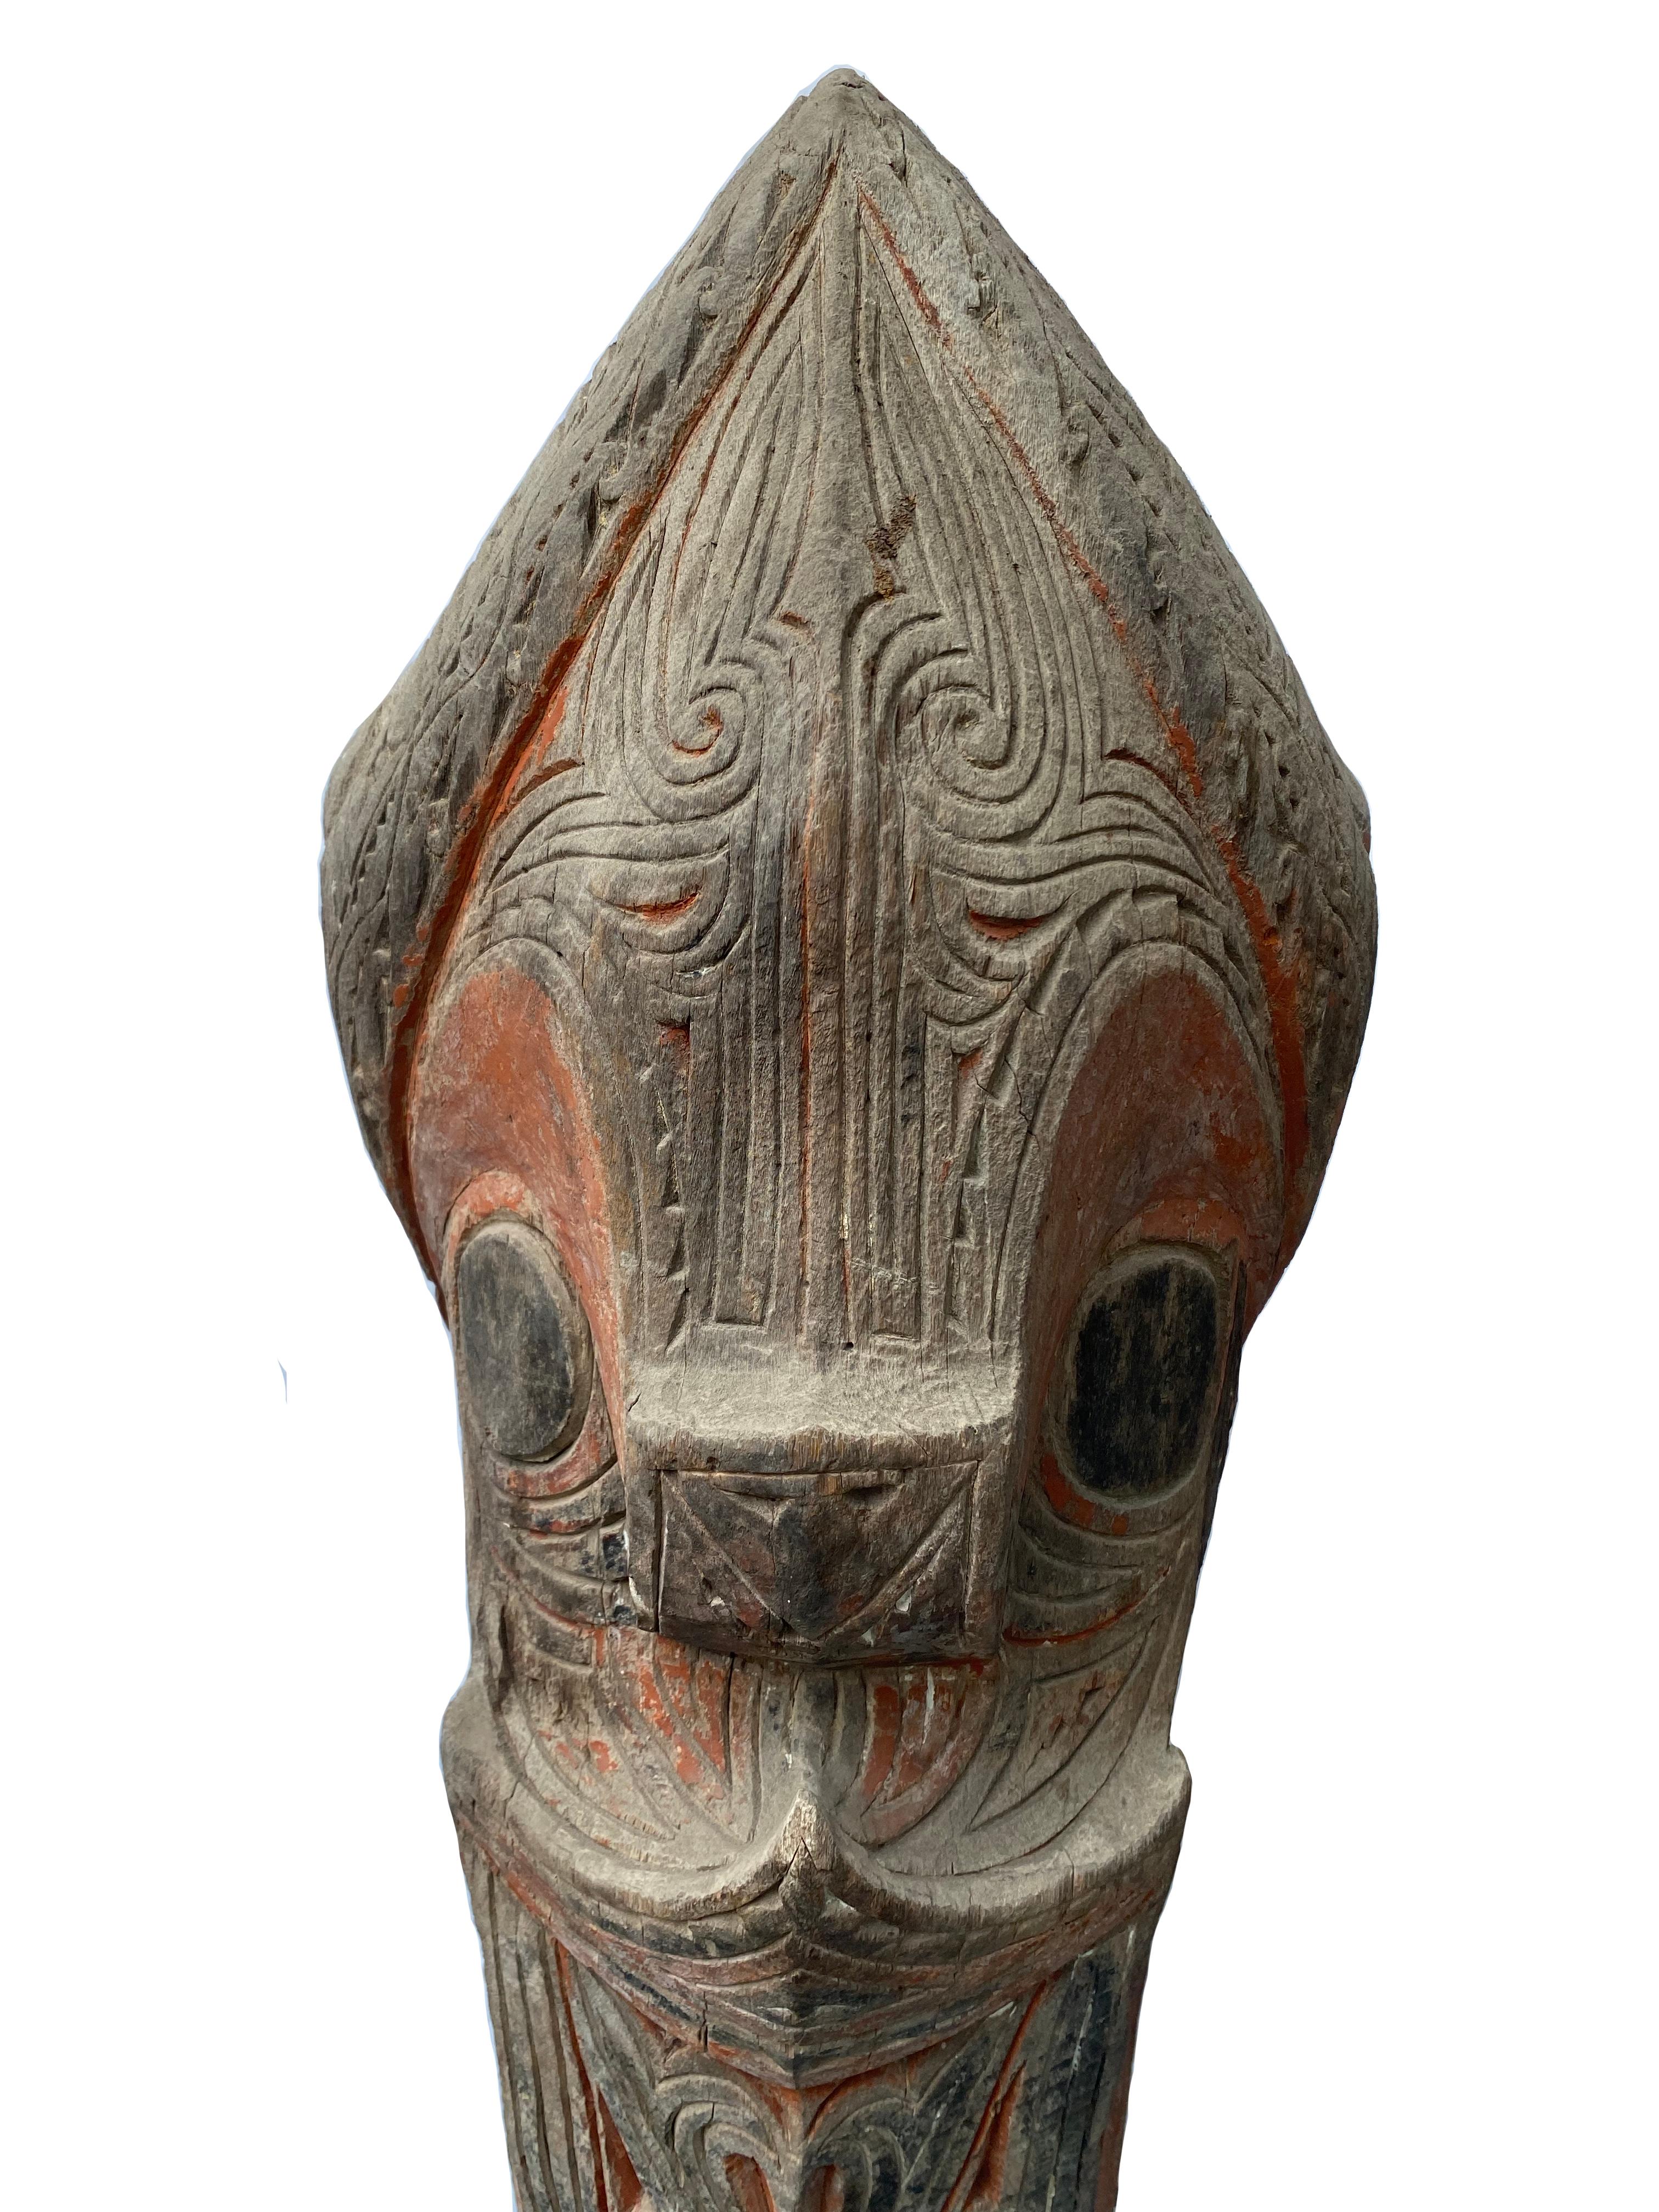 A Batak Tribe “Singa” from the Indonesian island of Sumatra. This mythical lion figure was used as a protective architectural element on the corner of a traditional Batak house. It features the traditional tri-color scheme of the Batak peoples